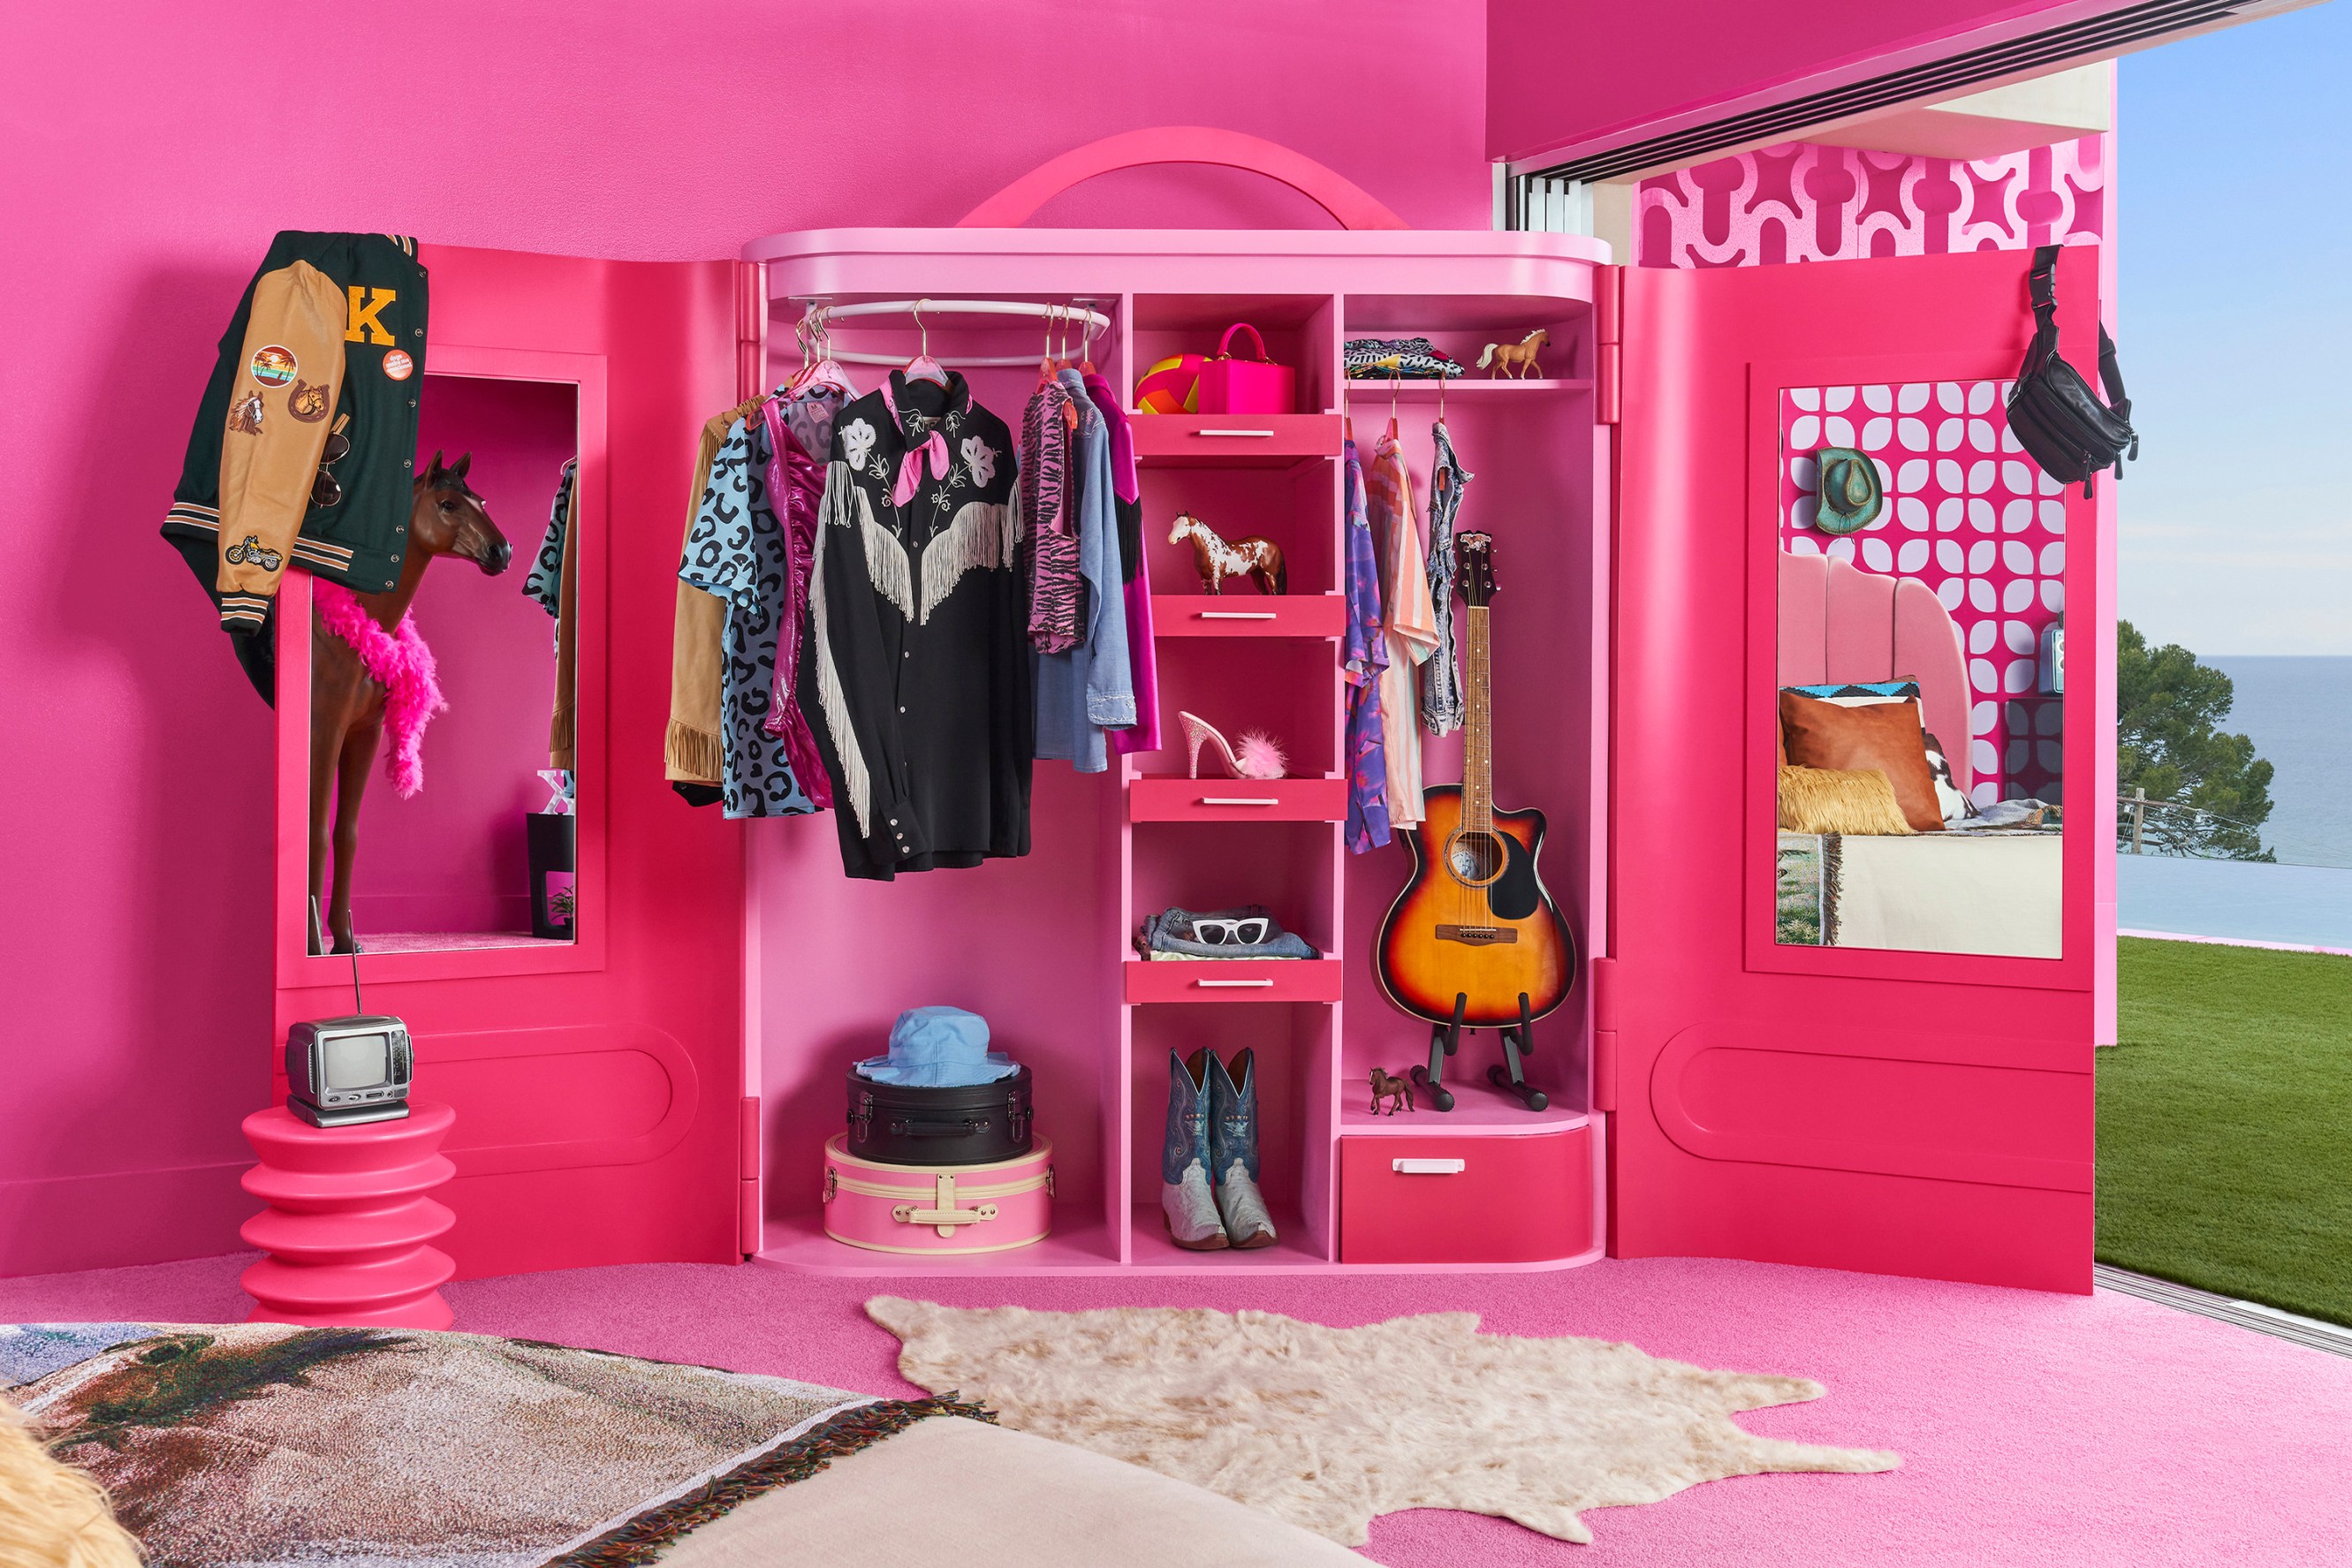 Interior of Ken's closet, bright pink, styled with jackets, shirts, a fanny pack and a guitar.